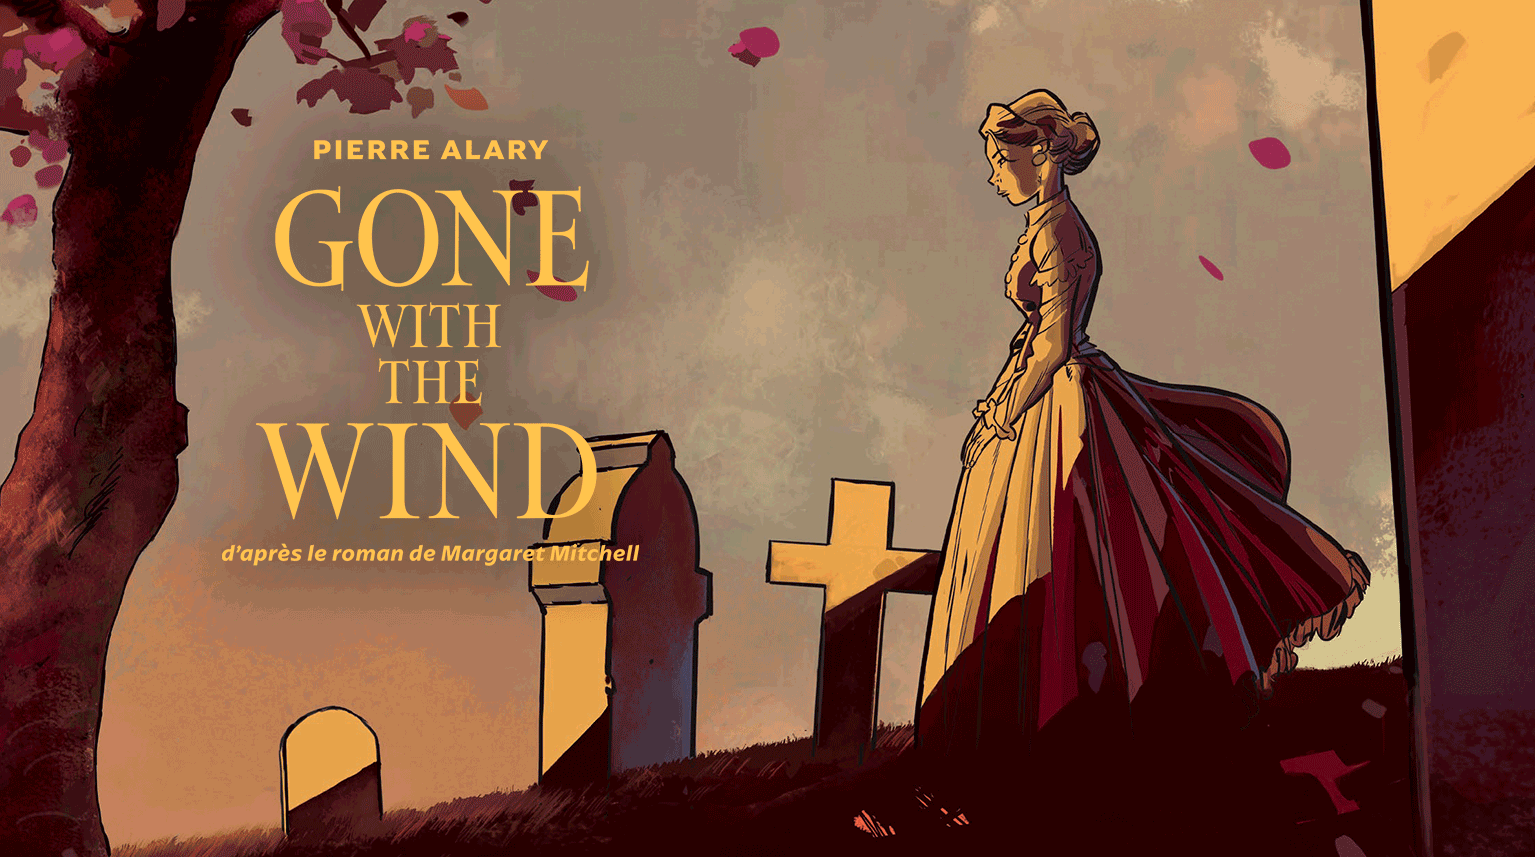 Gone with the Wind en librairie la semaine prochaine